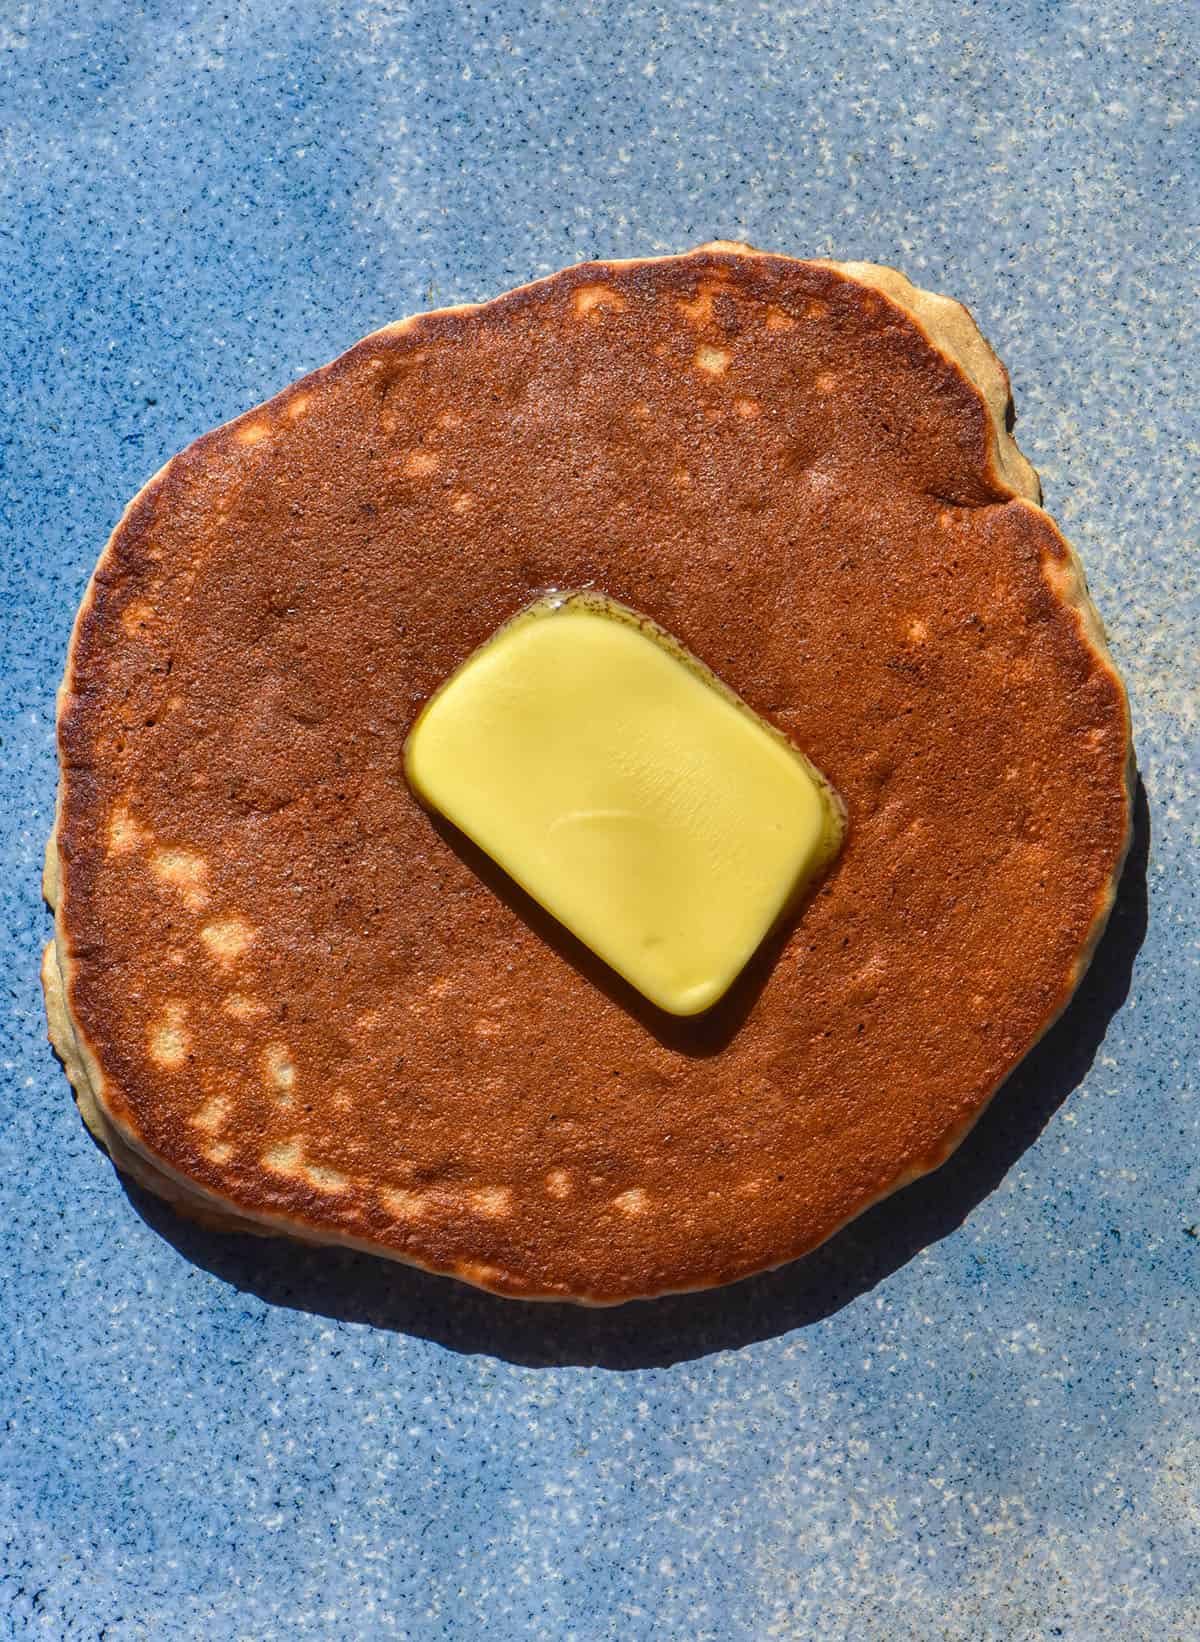 An aerial image of a buckwheat banana pancake on a bright blue ceramic plate. The pancake is a deep brown and topped with a square piece of melting butter.